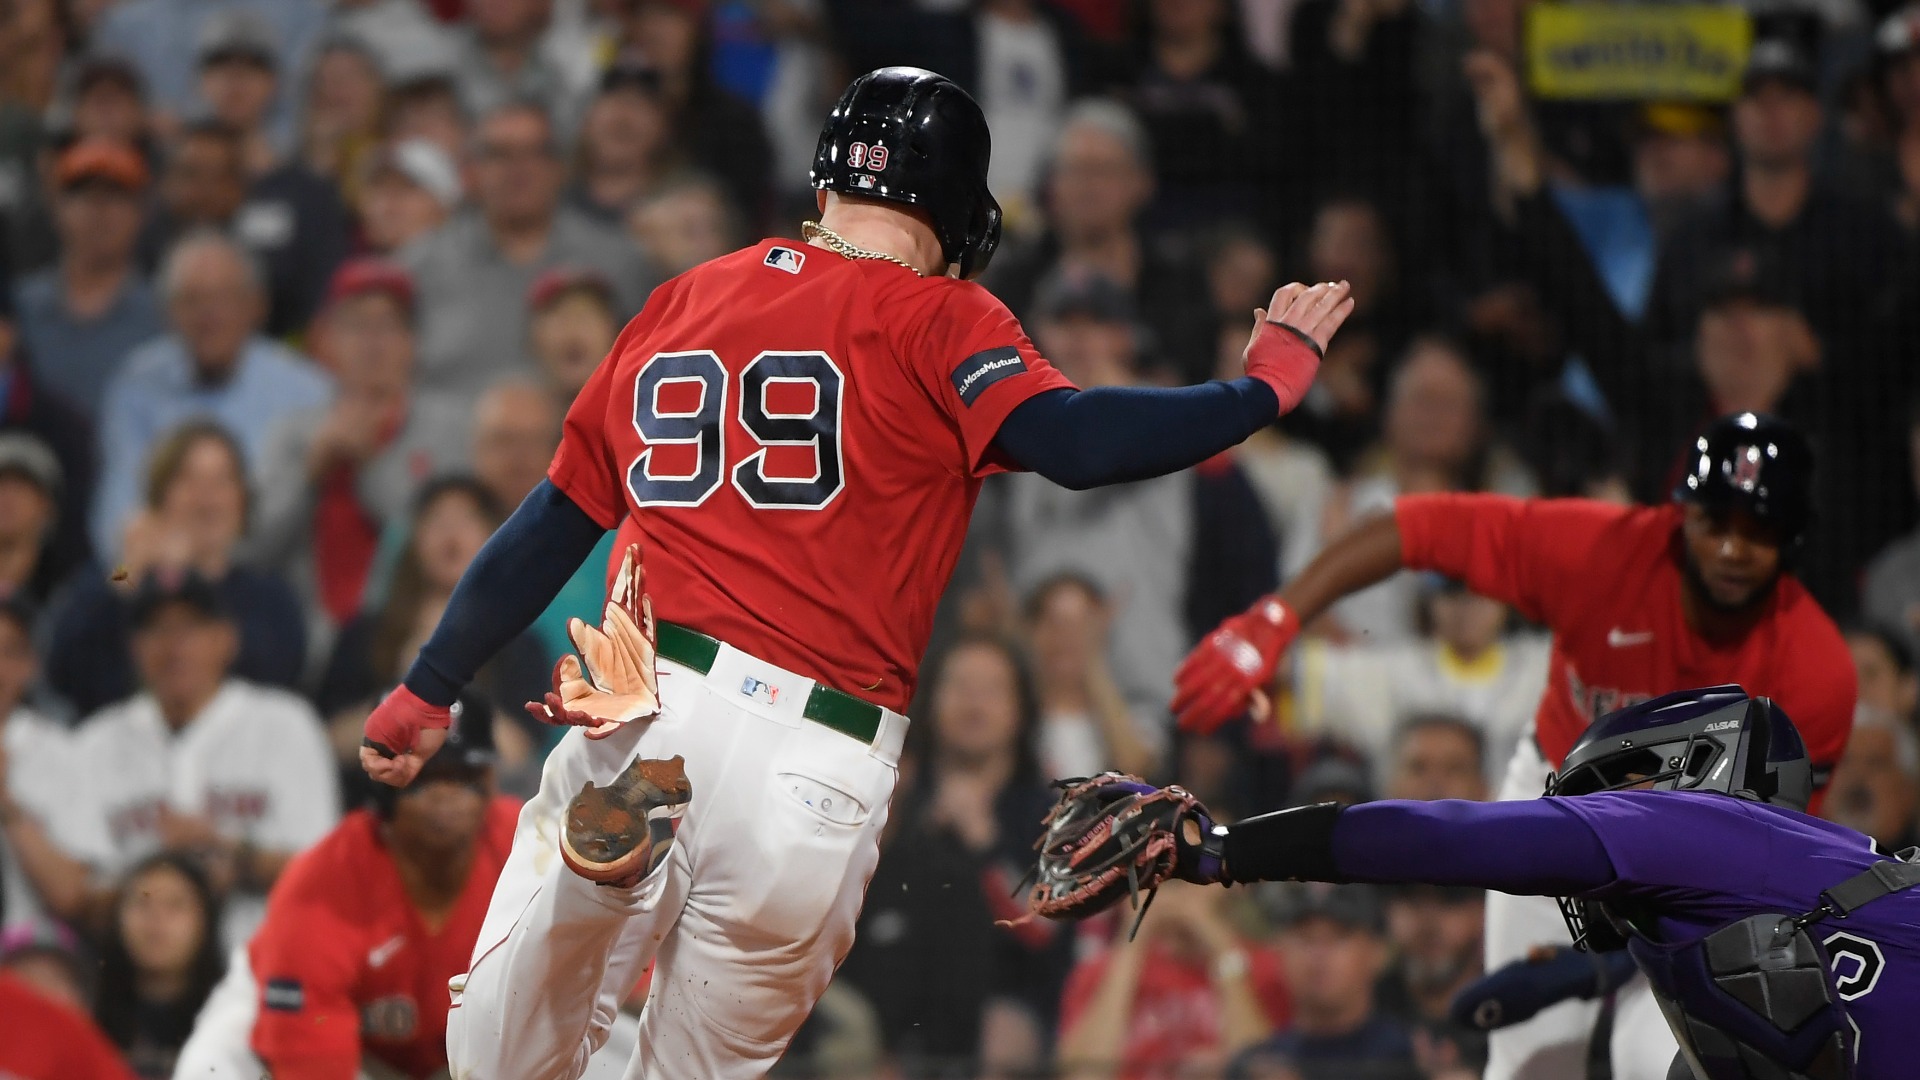 Alex Verdugo Benched Vs. Guardians For Not Hustling Out Ground Ball -  Sports Illustrated Inside The Red Sox